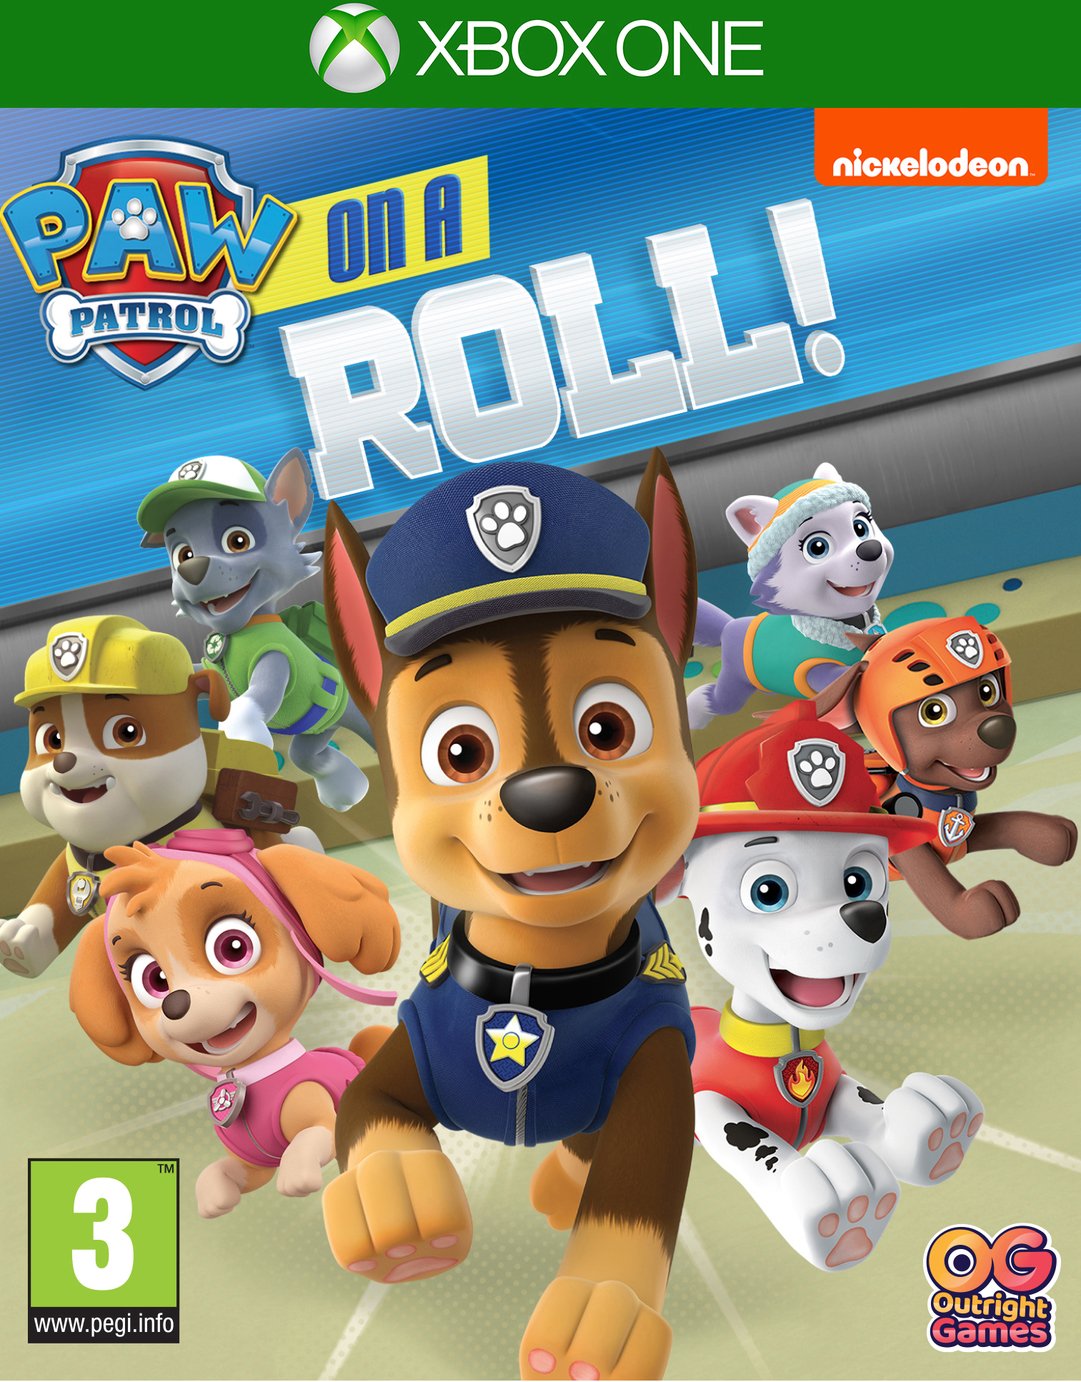 paw patrol on a roll video game